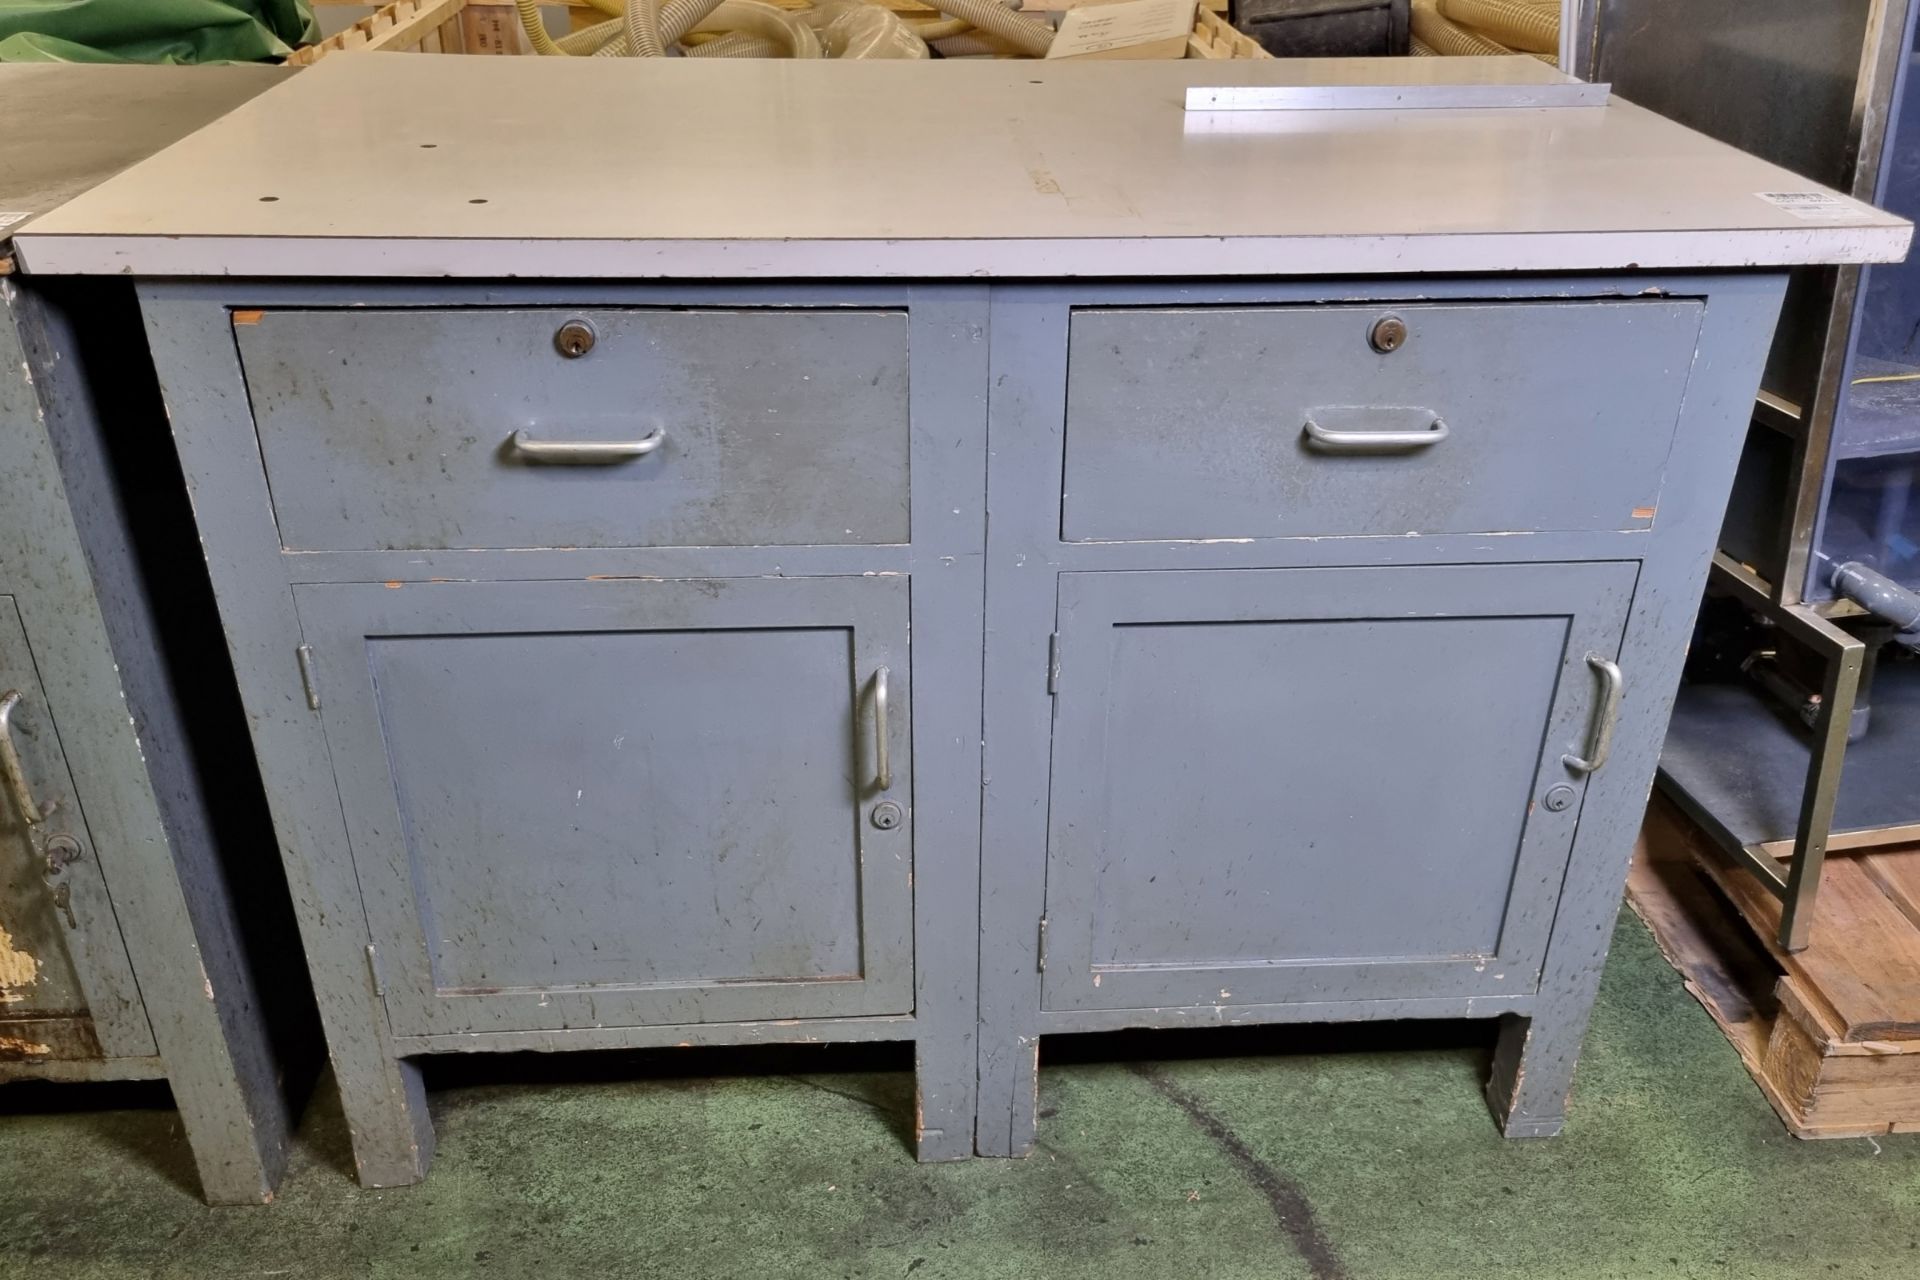 Wooden workbench with 2 drawers and 2 lockable cabinet doors